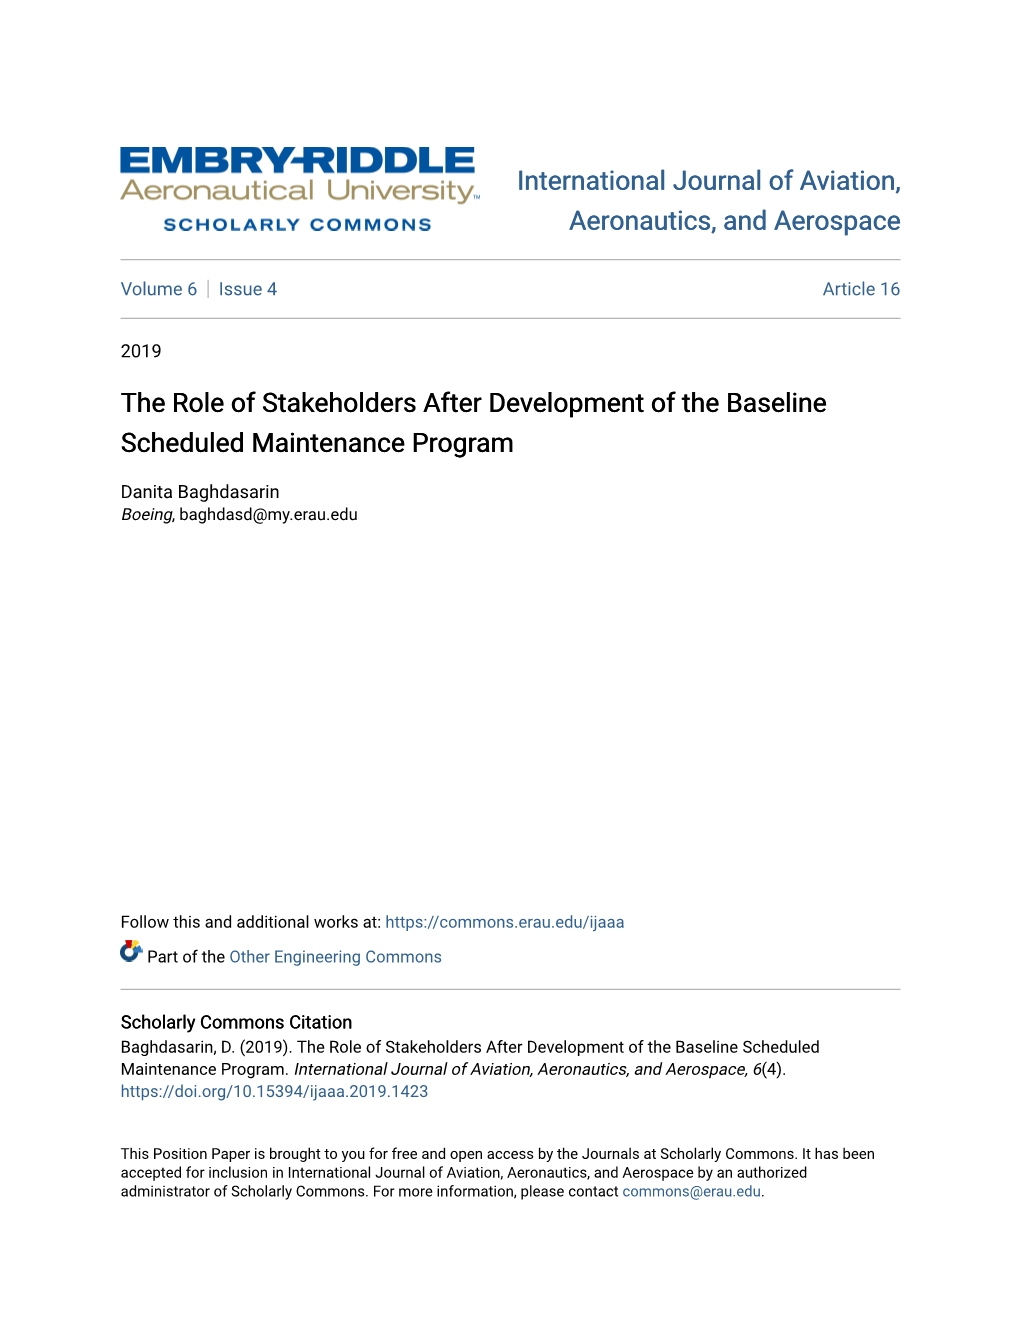 The Role of Stakeholders After Development of the Baseline Scheduled Maintenance Program